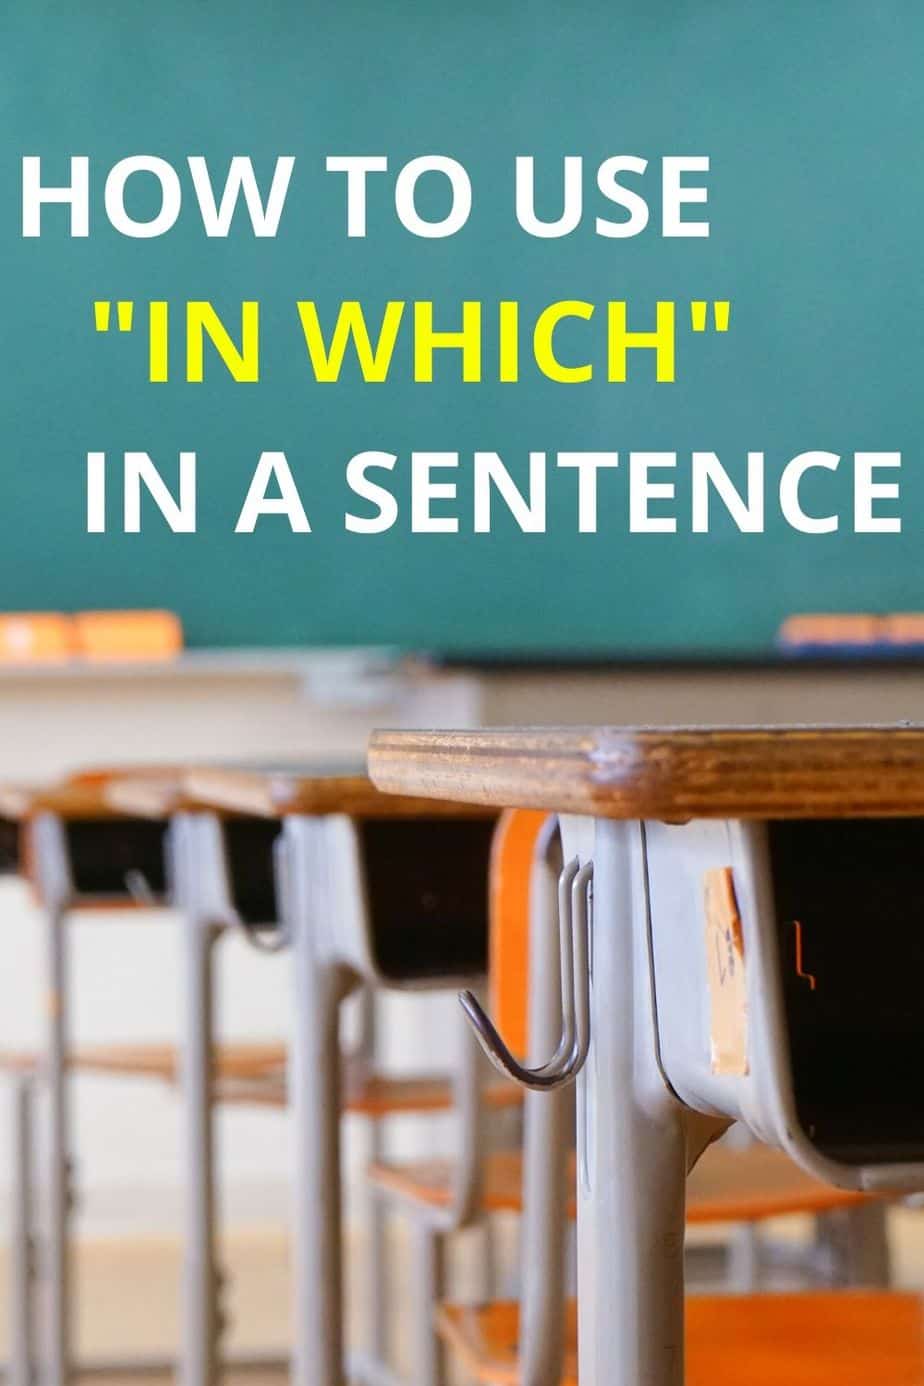 How to Use "in which" in a Sentence